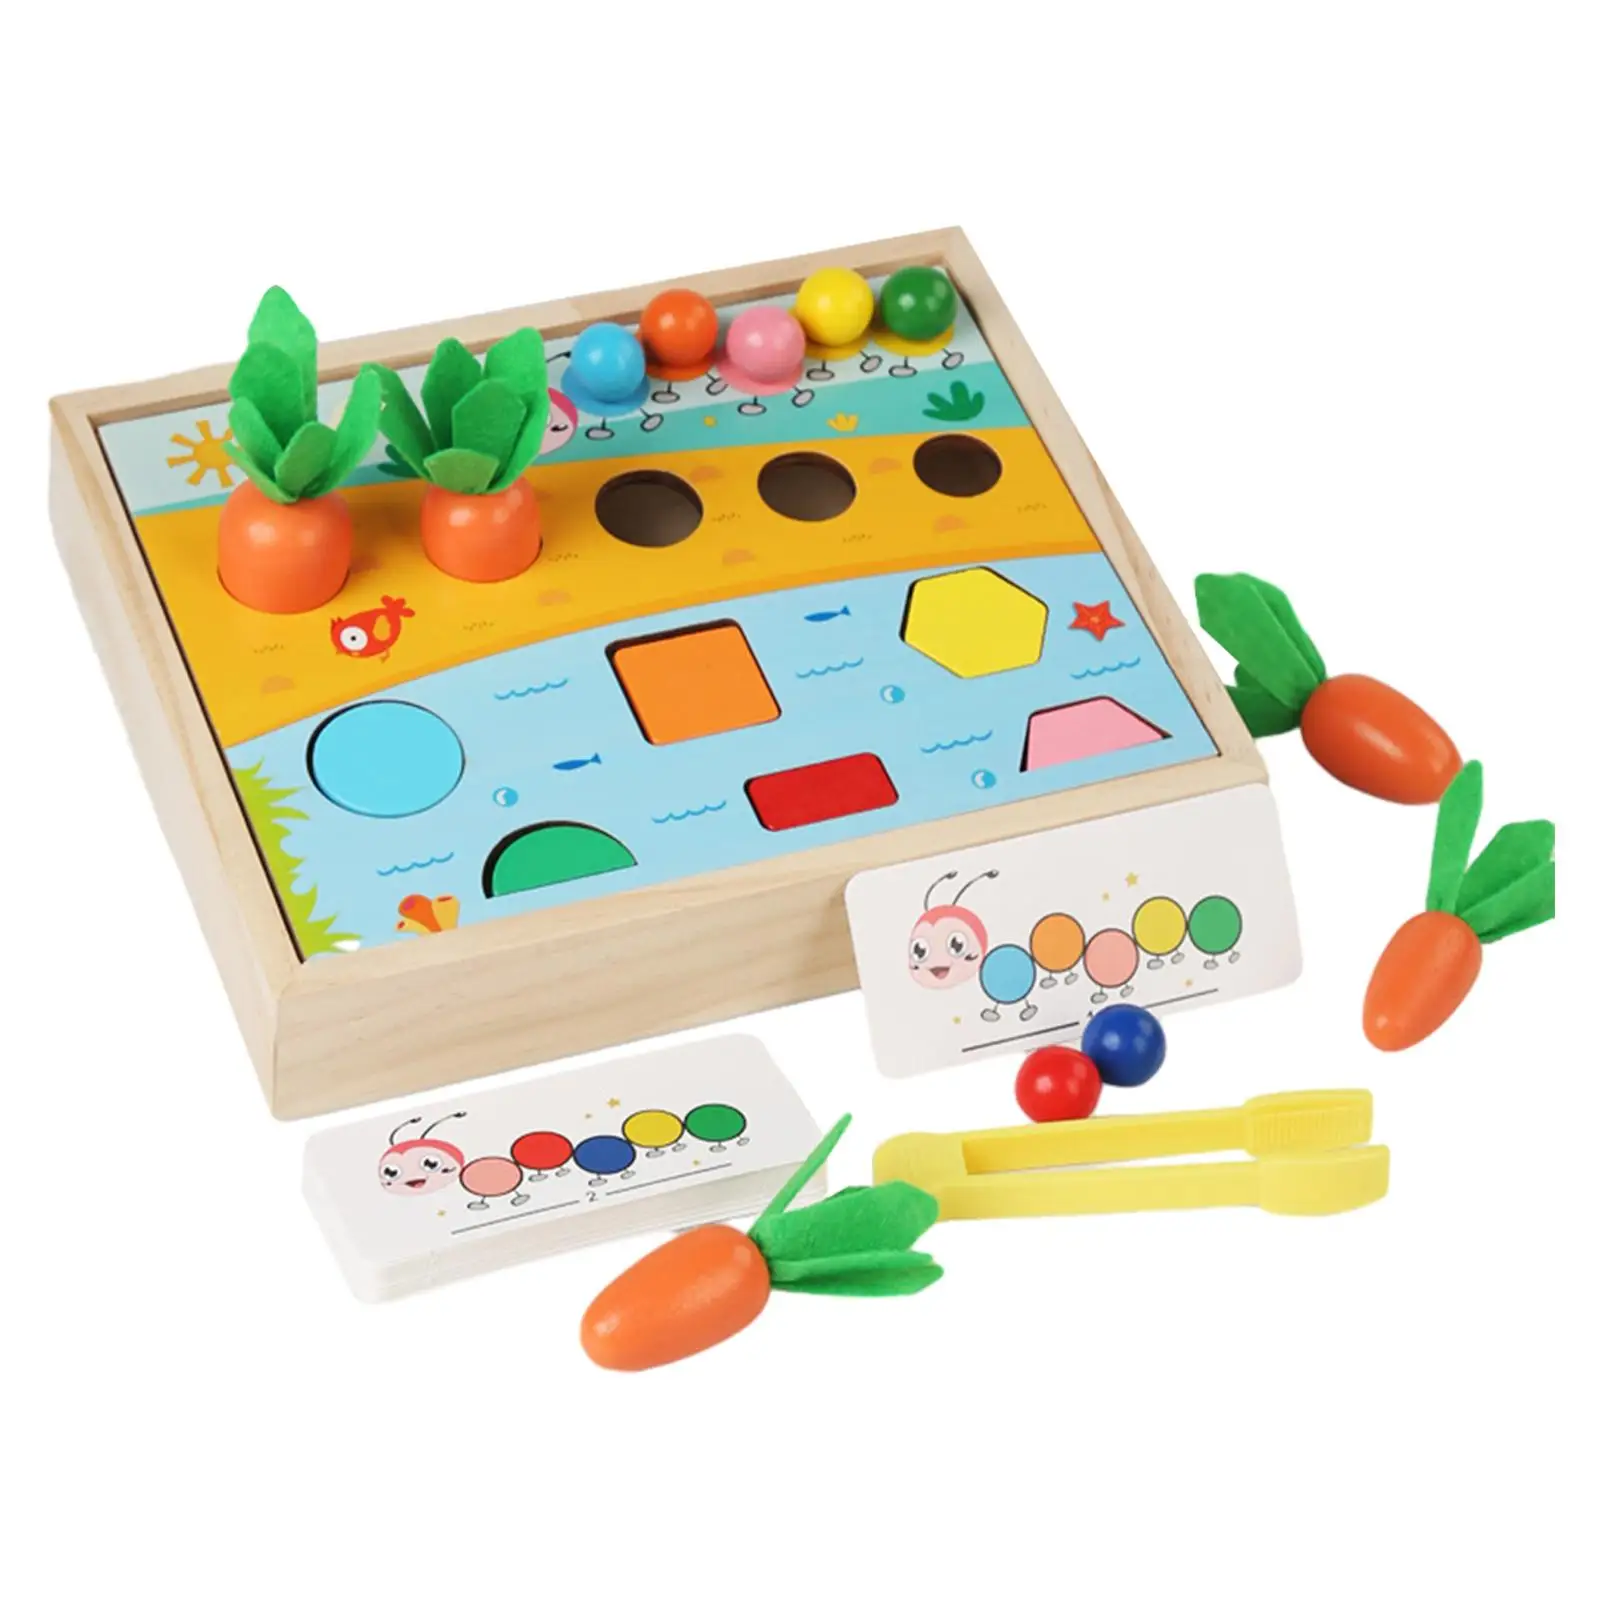 Wooden Shape Color Sorting Toy Educational Color Sorting Game Shape Sorter Puzzle Toy for Toddlers Kids Children Girls Boys